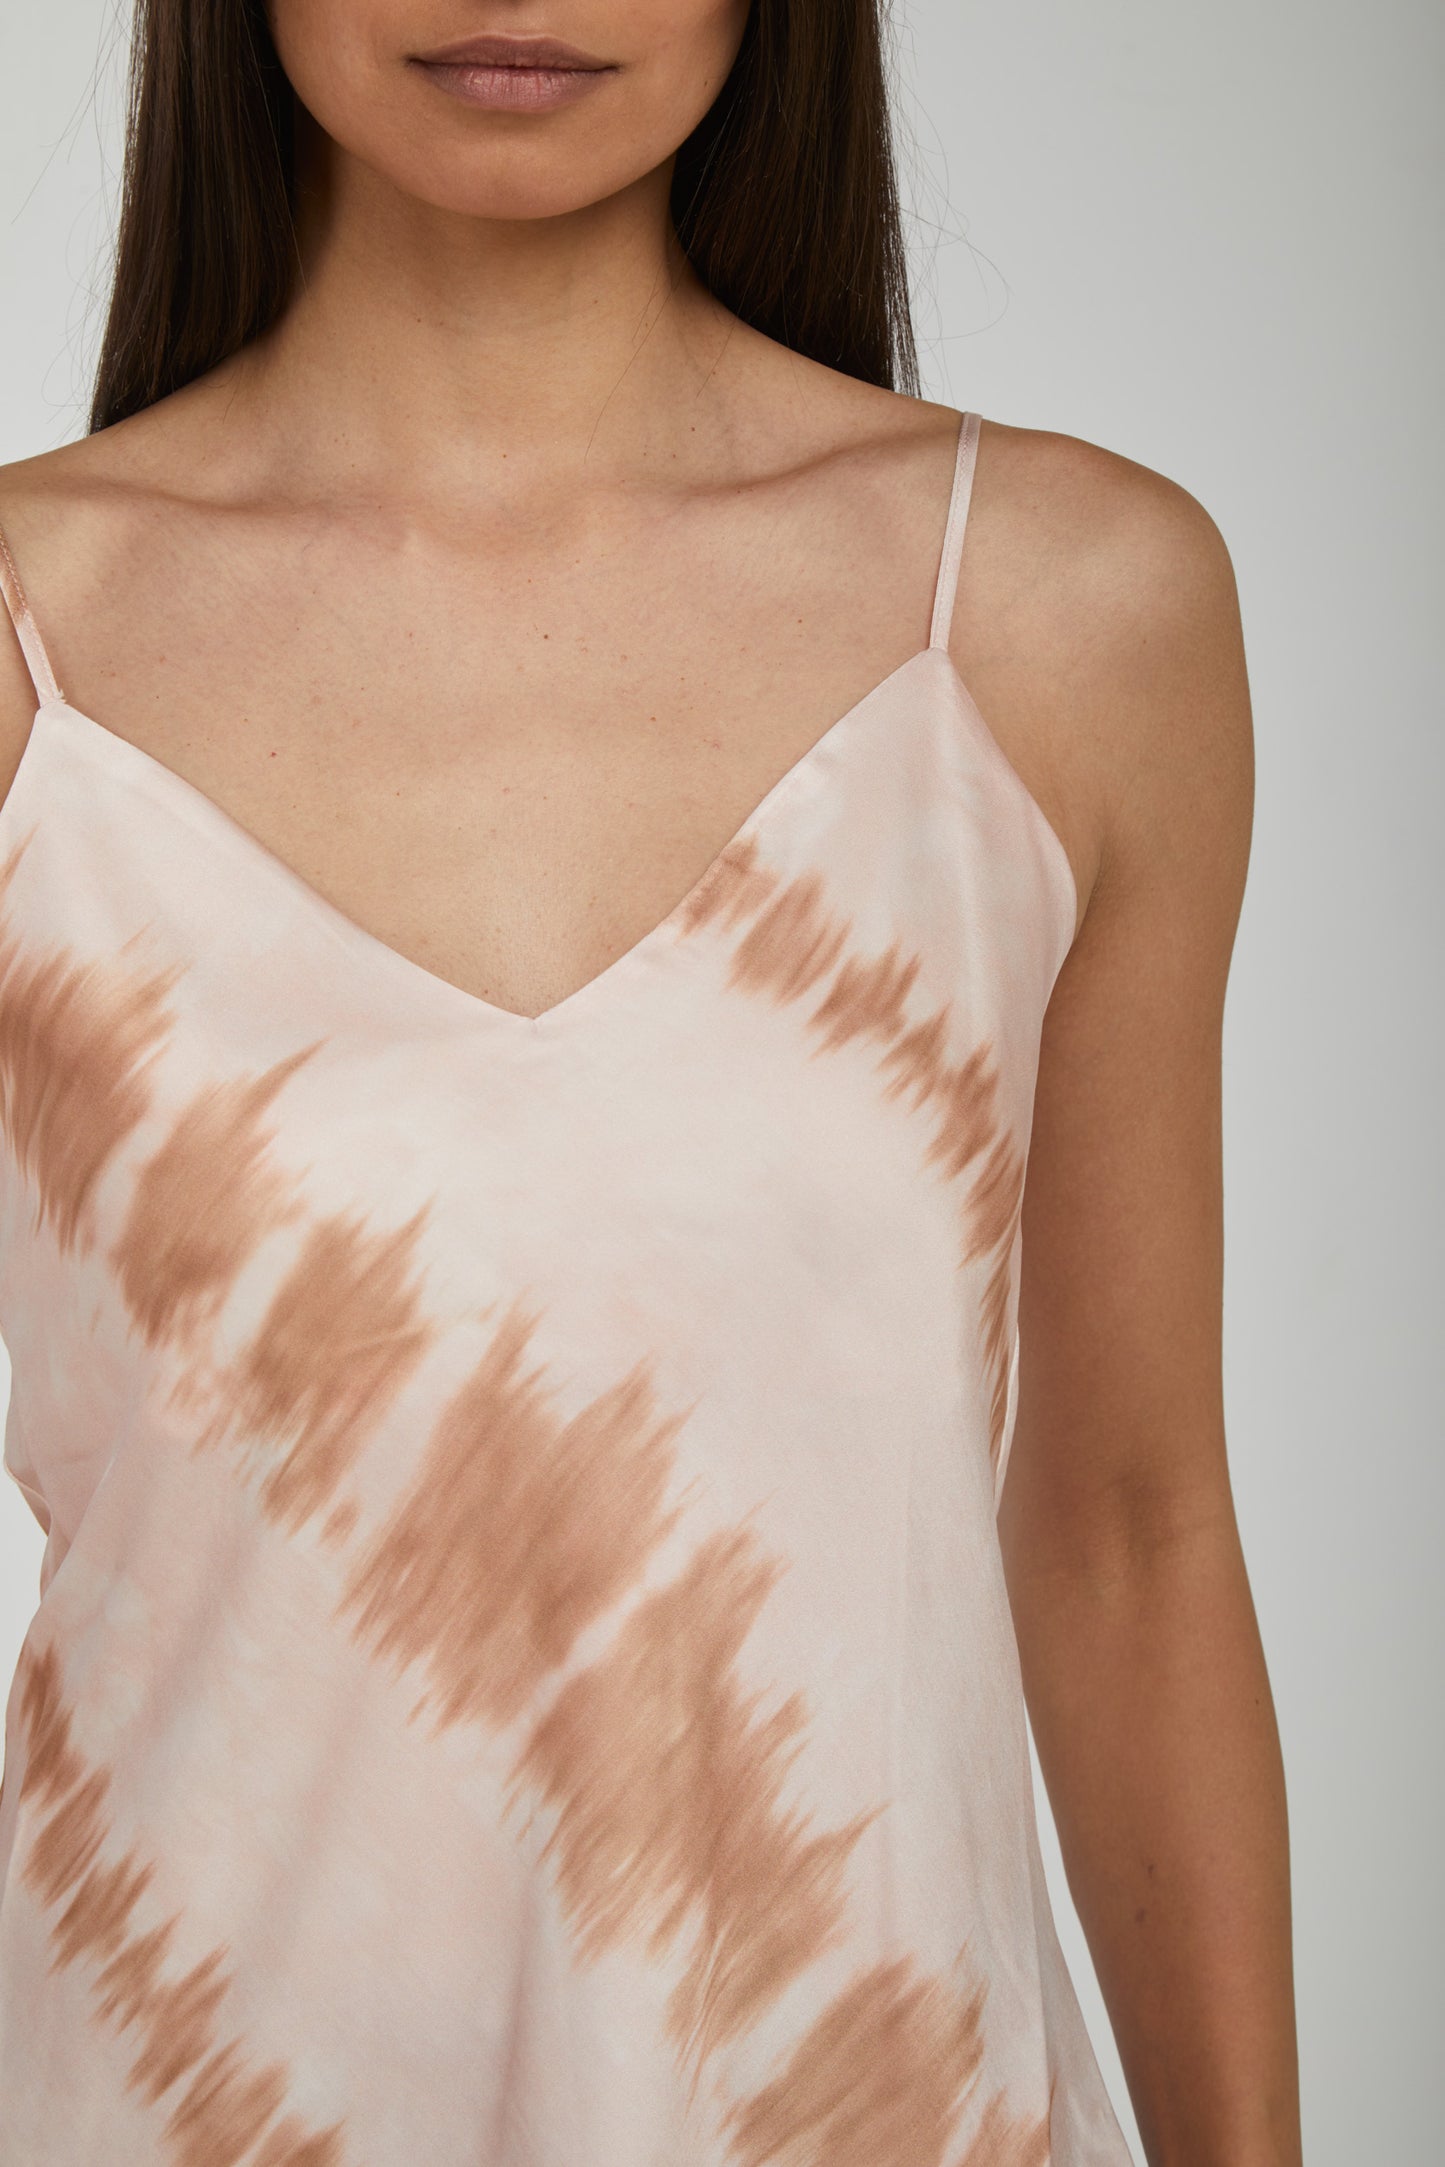 PINKO Pink and Brown Tie-Dye Top